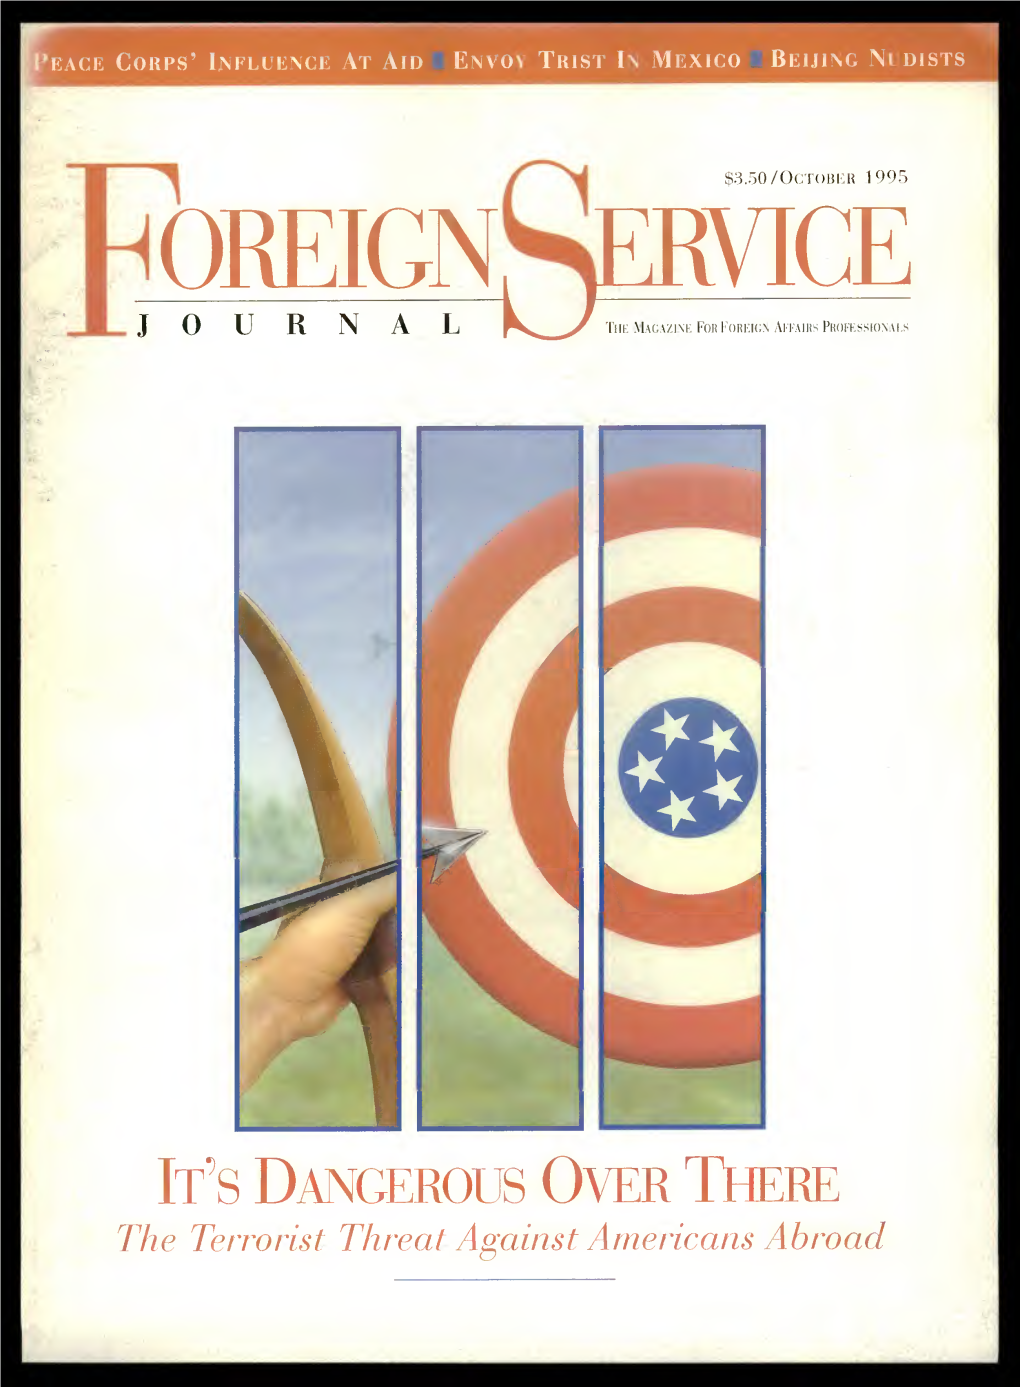 The Foreign Service Journal, October 1995